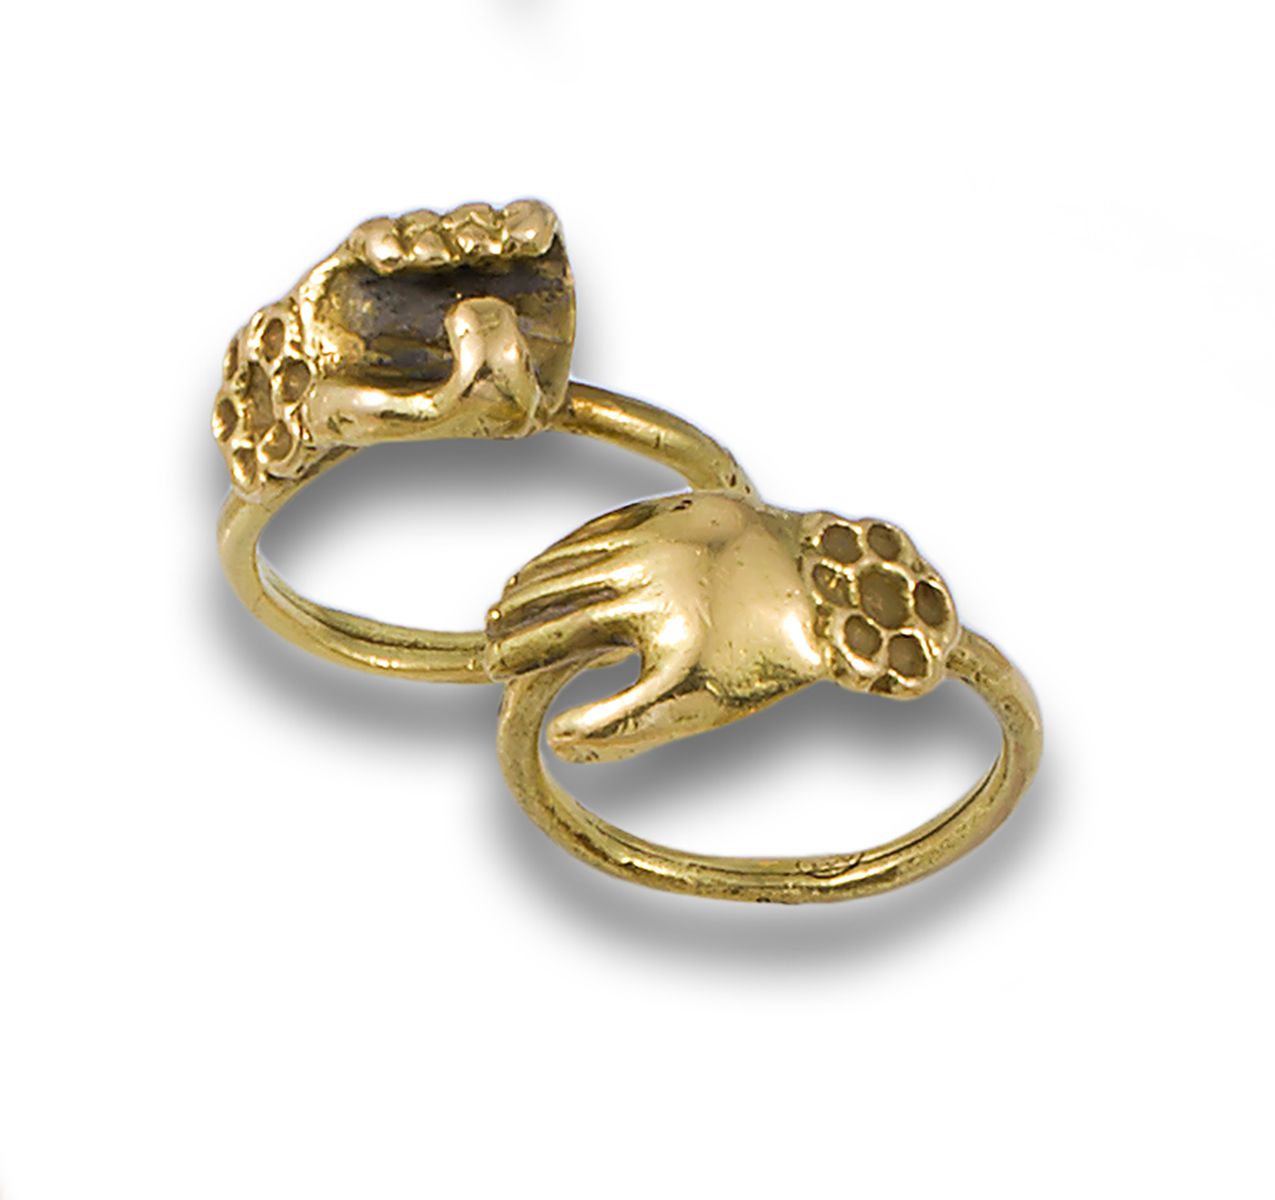 TWO YELLOW GOLD HAND RINGS Set of two 18kt yellow gold handring rings. . .